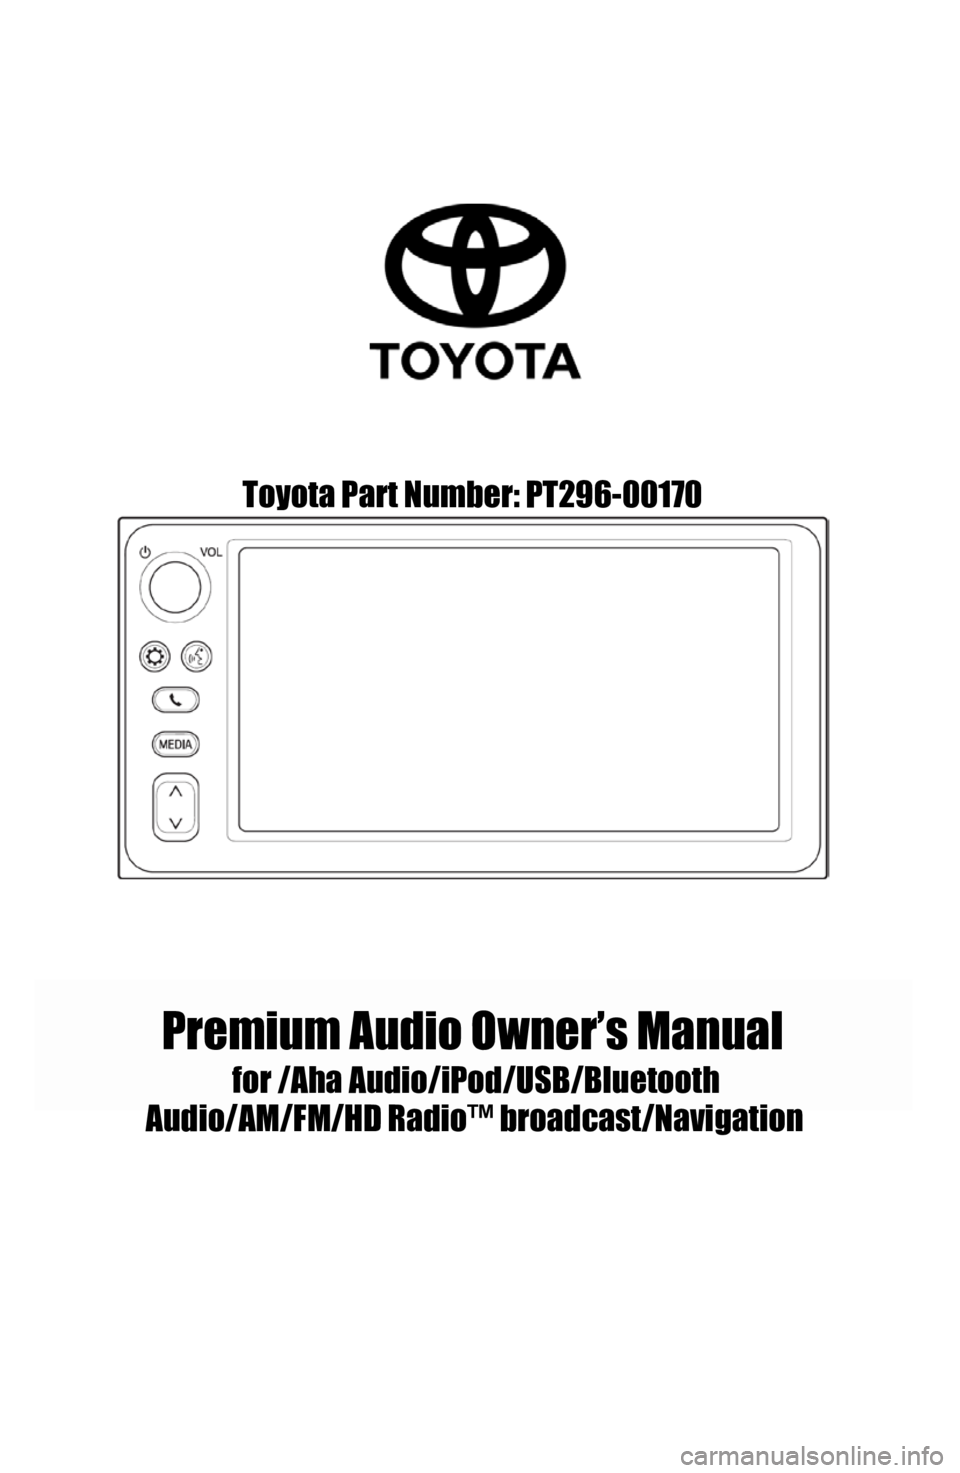 TOYOTA GT86 2019  Accessories, Audio & Navigation (in English) Toyota Part Number: PT296-00170
Premium Audio Owner’s Manual
for /AhaAudio/iPod/USB/Bluetooth 
Audio /AM/F M/HD Radio™ broadcast/Navigatio n 